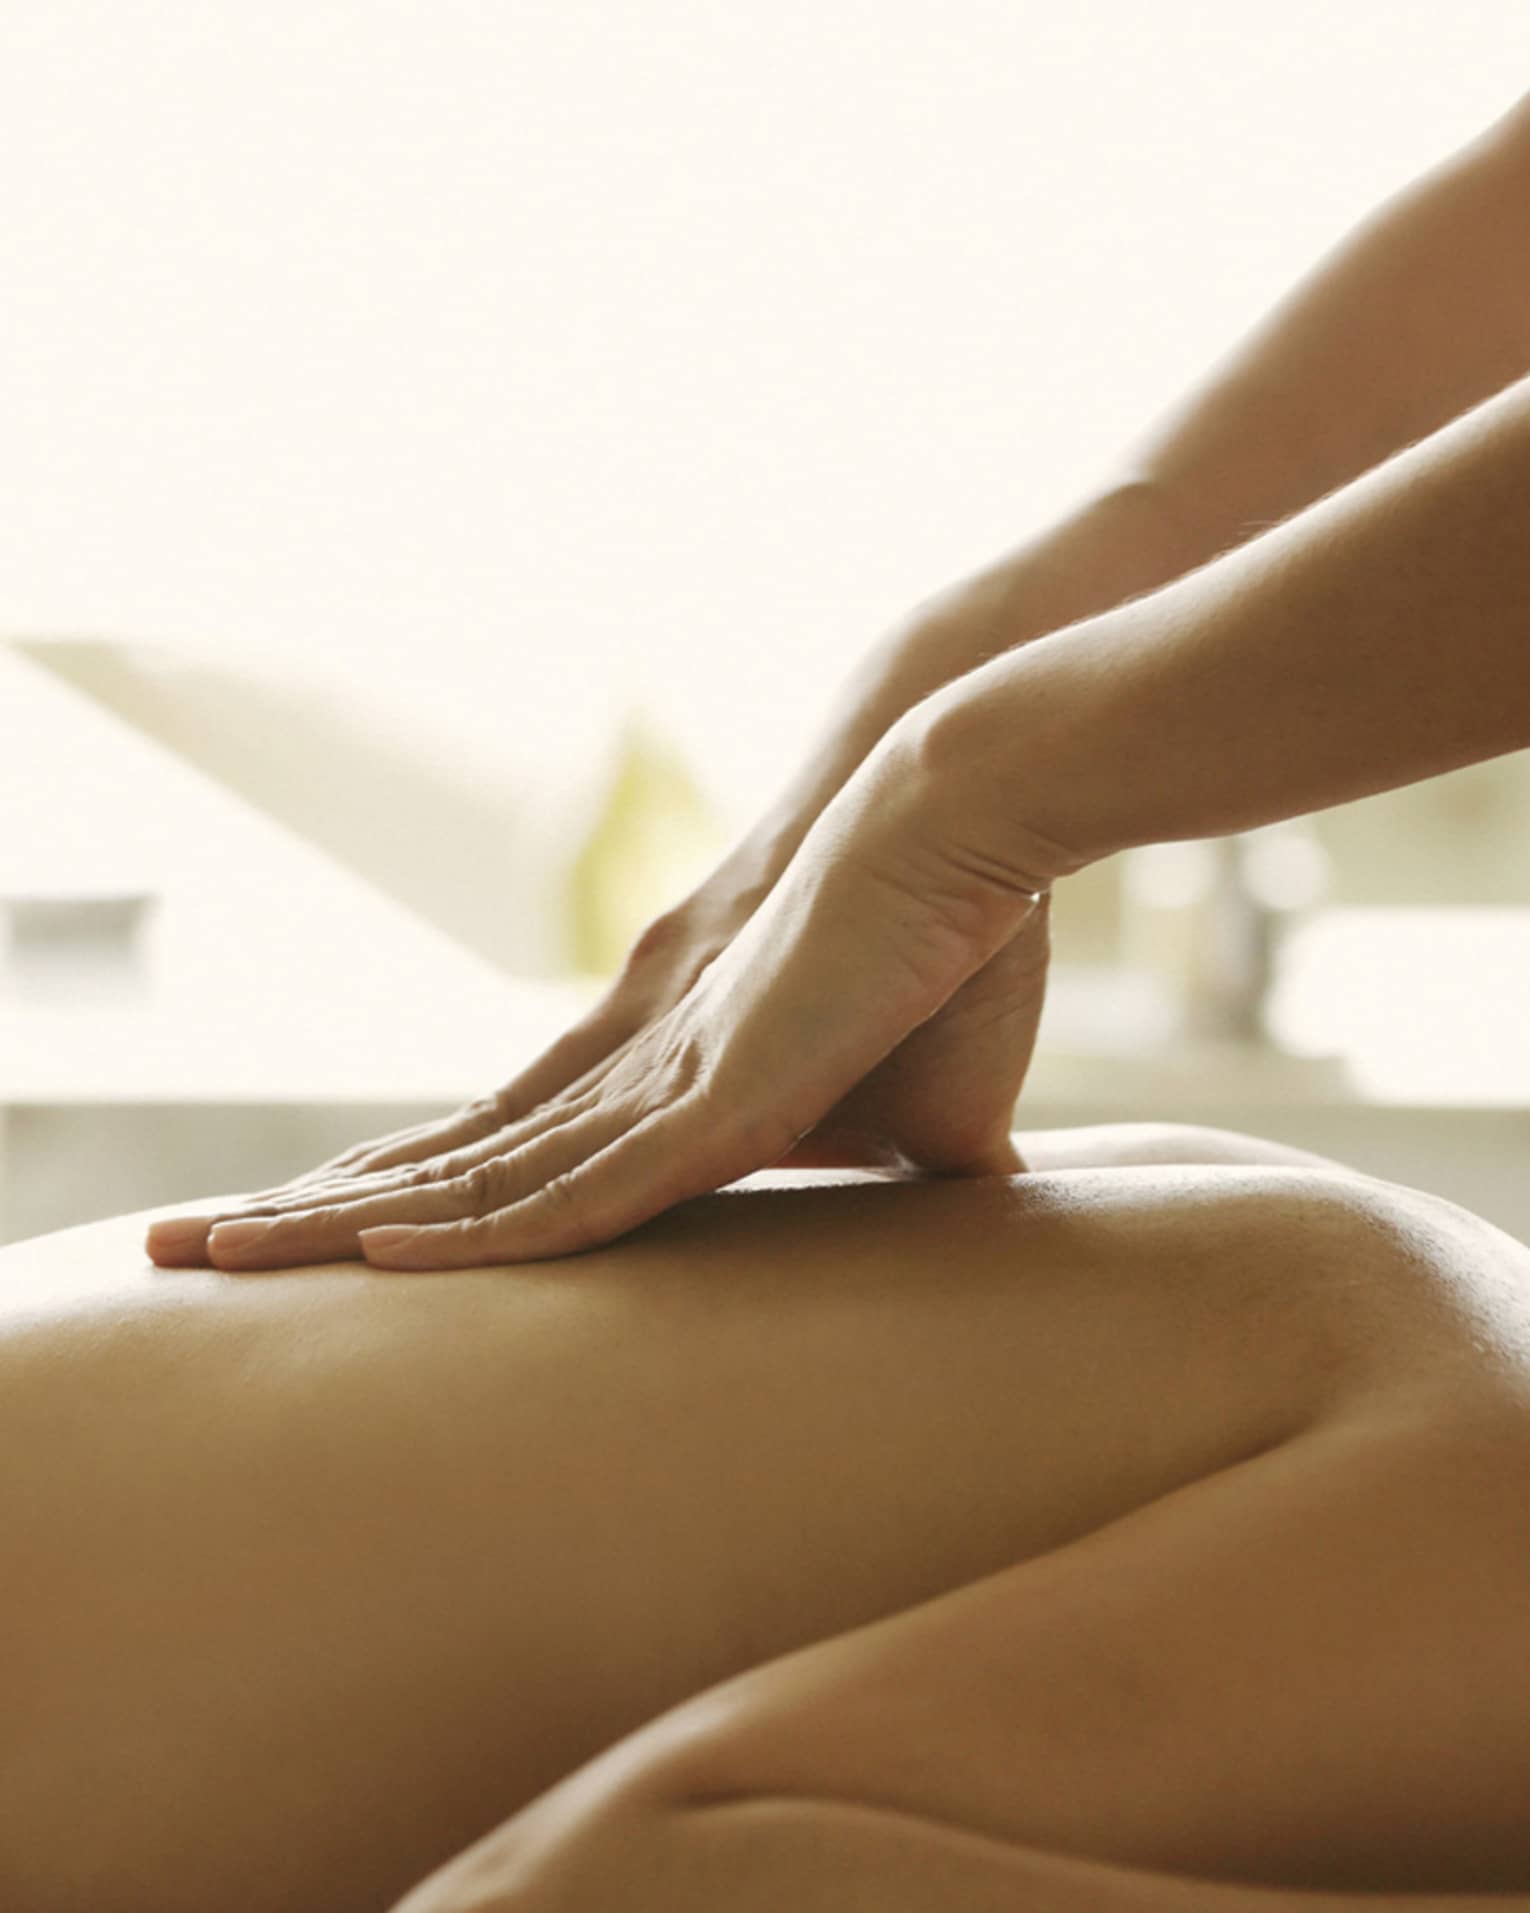 Masseuse reaches over, massages woman's bare back as she lies on spa table